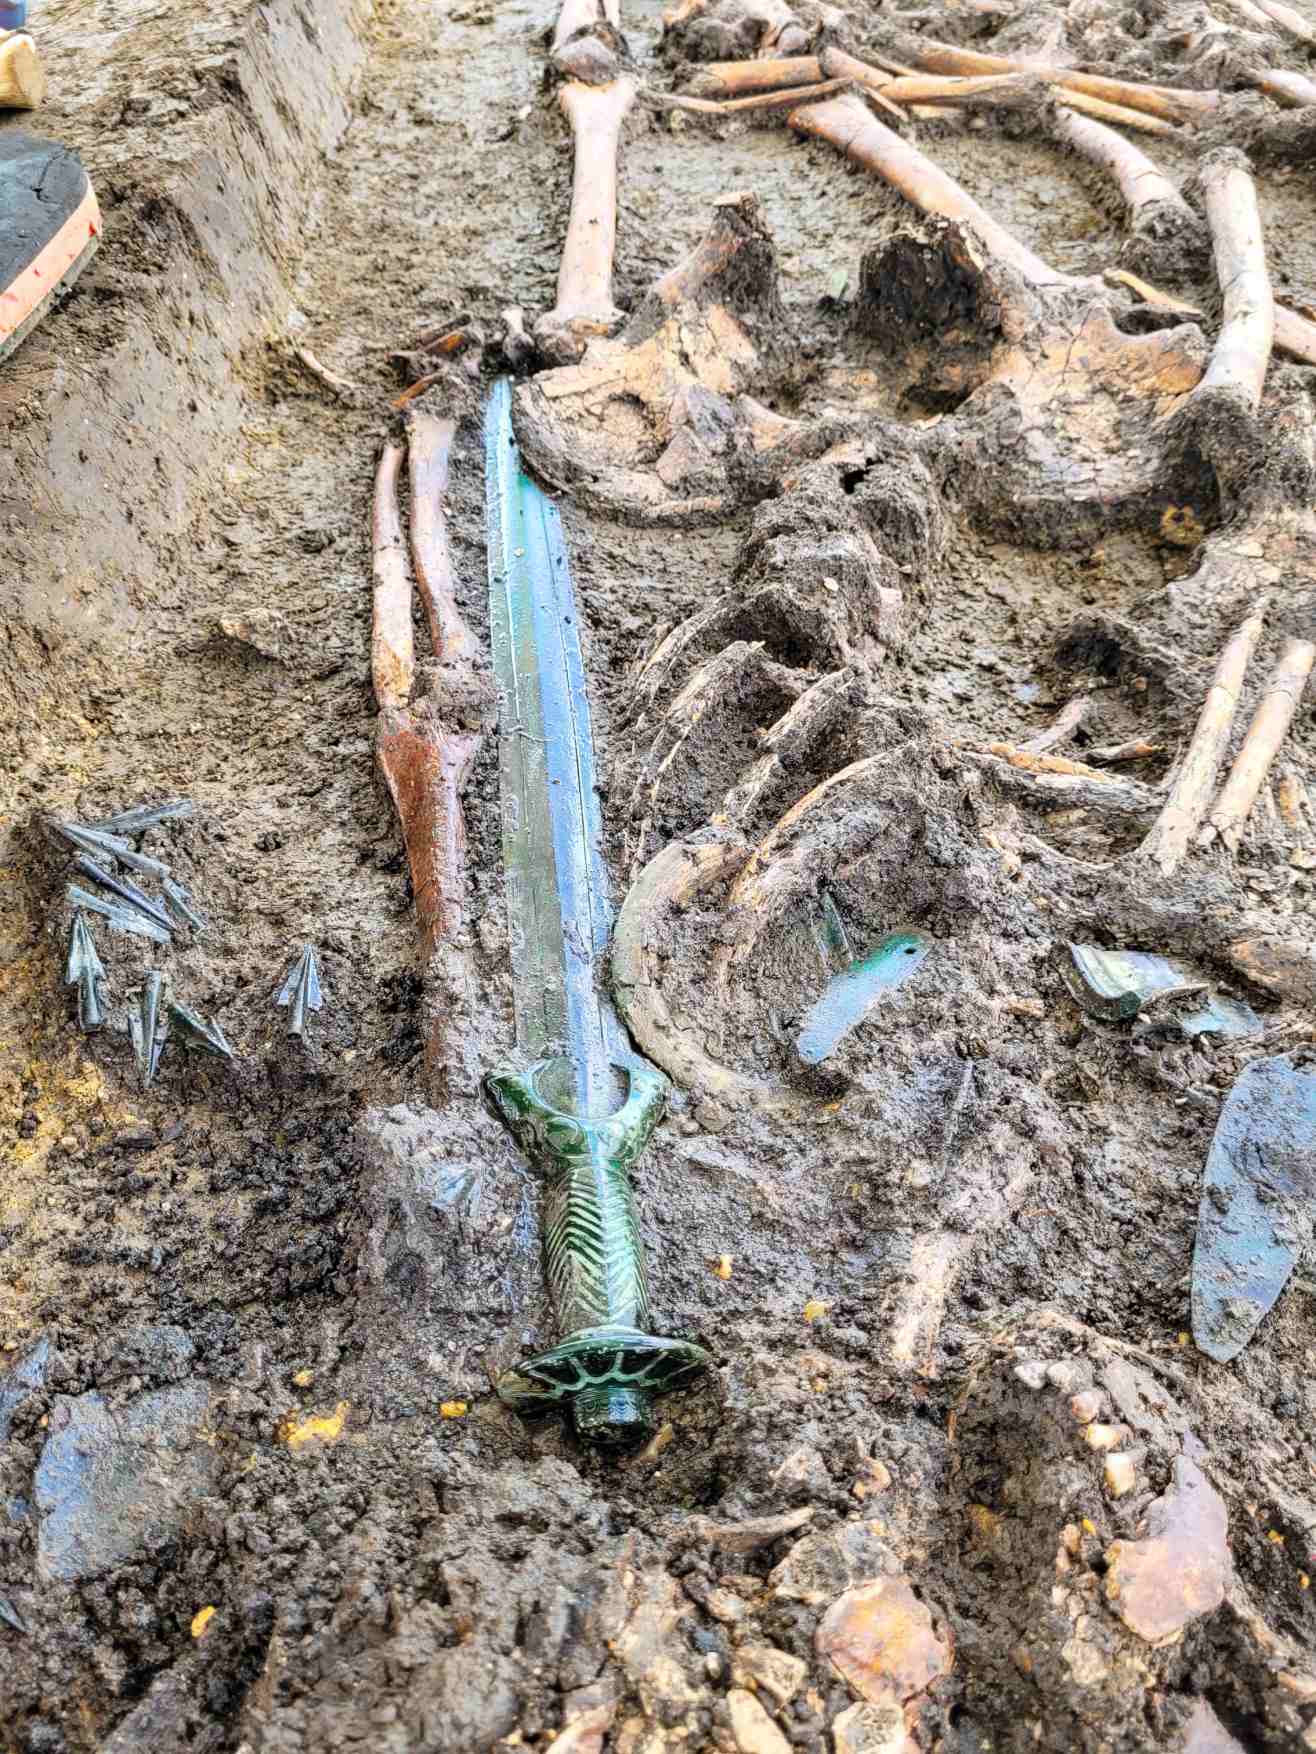 The newfound sword was discovered in a burial that had the remains of a man, woman and child.